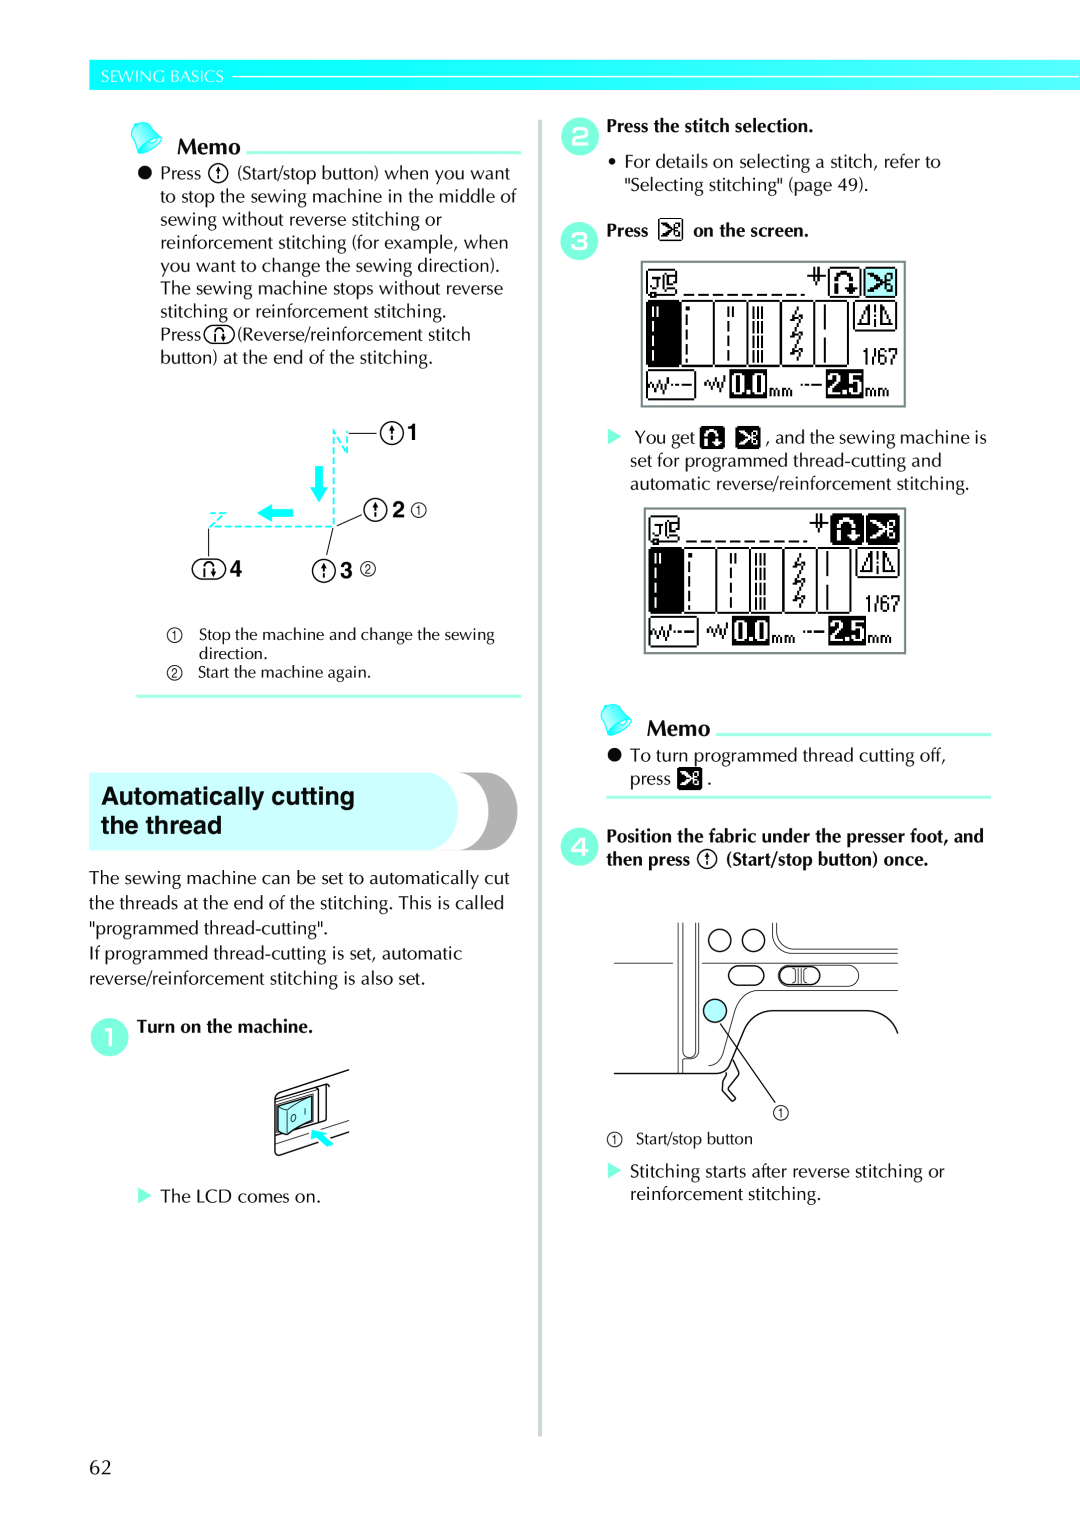 Brother 885-V33, 885-V31 operation manual Automatically cutting the thread, 3 b, Memo, Sewing Basics 